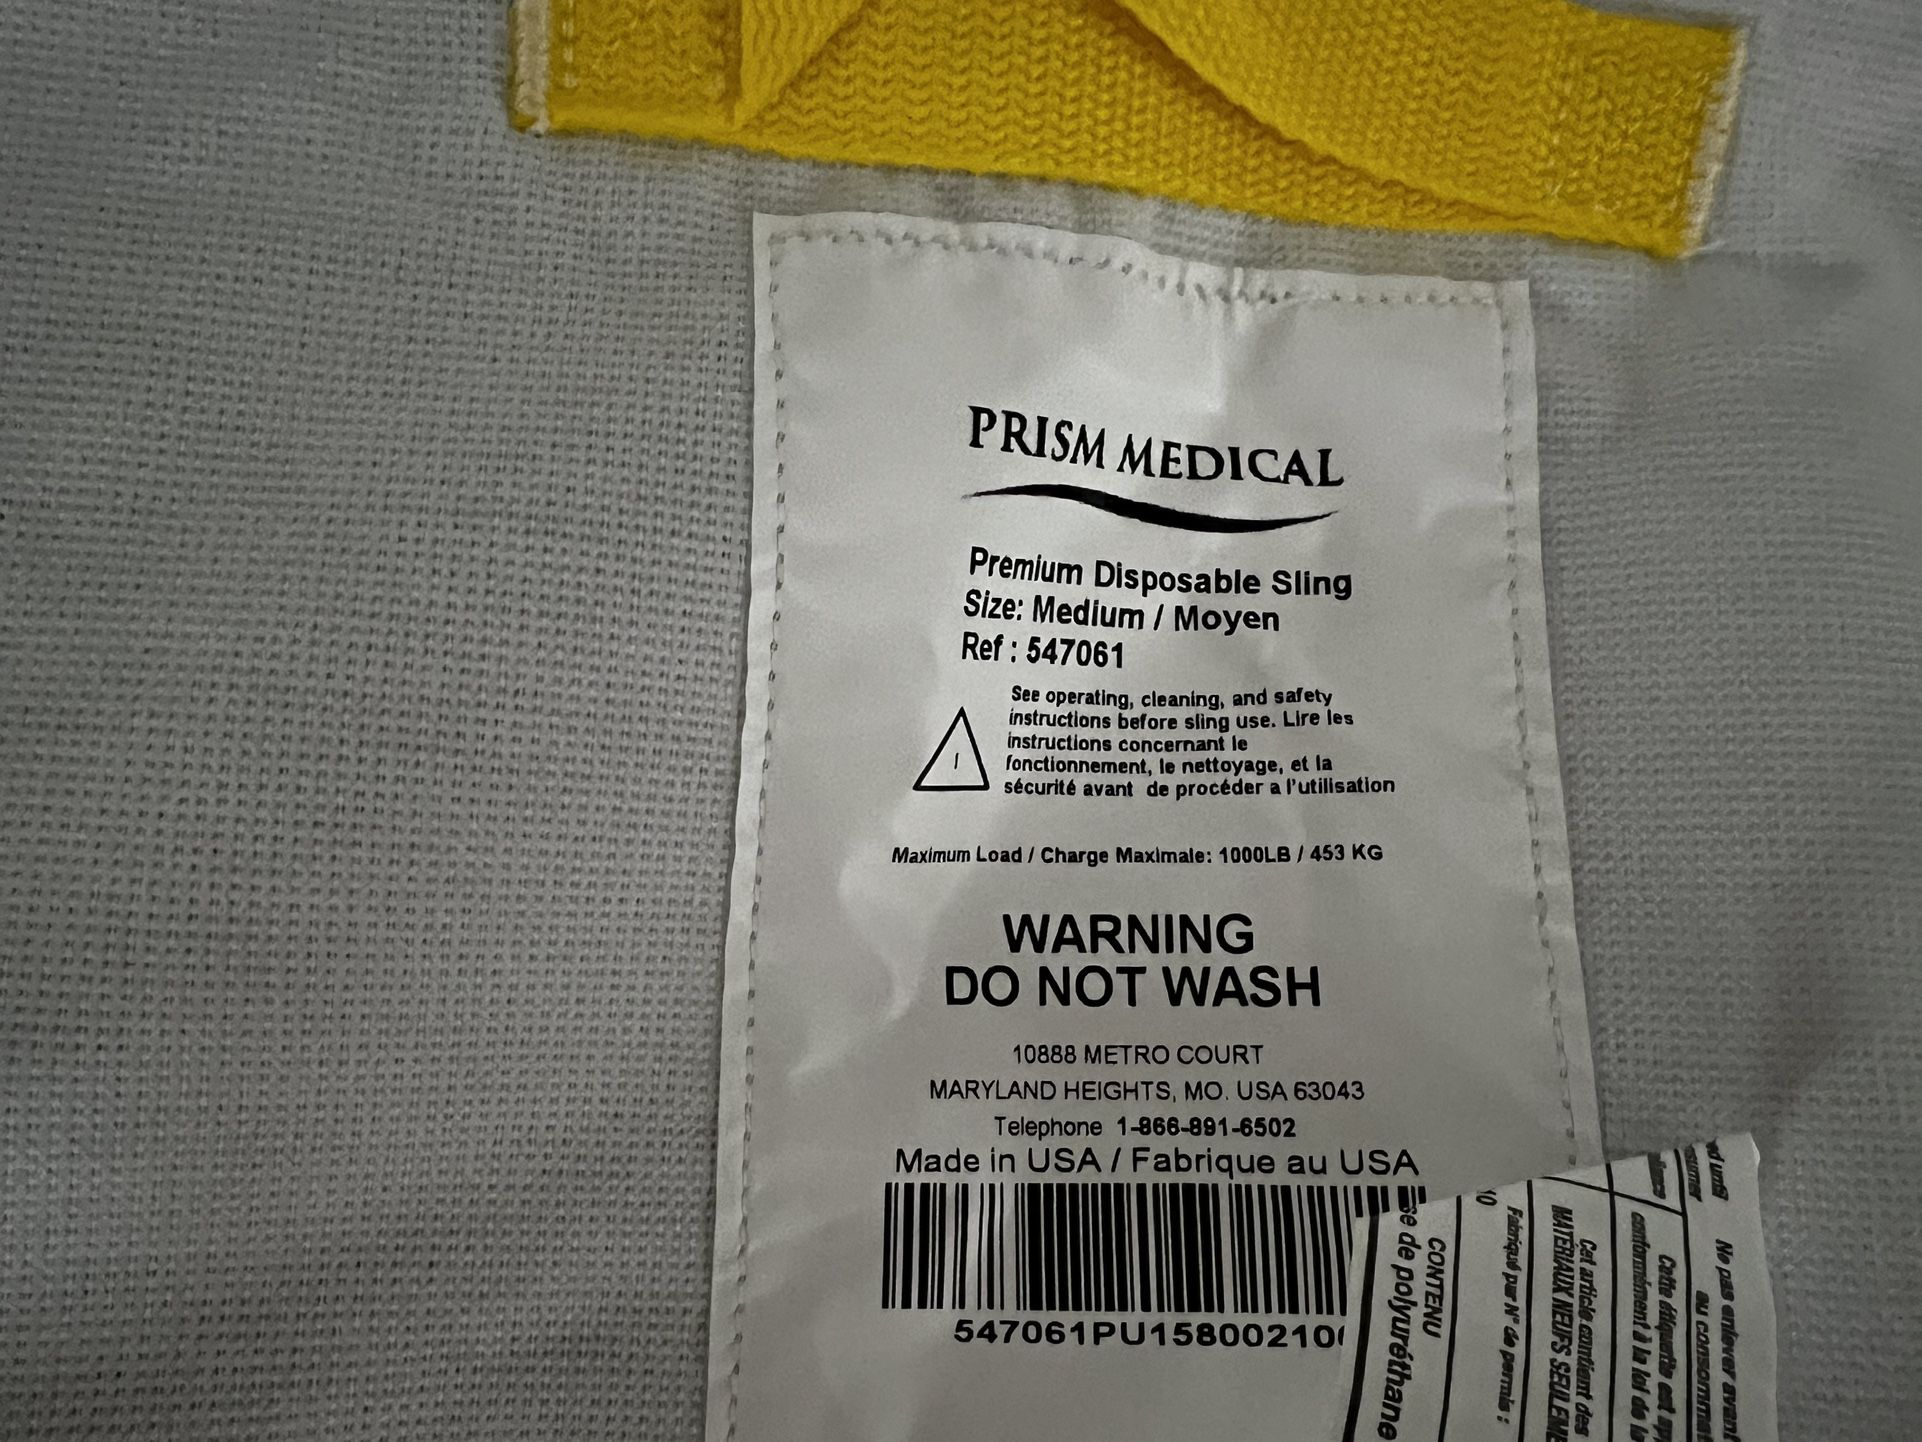 4 - Brand new Prism Disposable Sling - Size medium